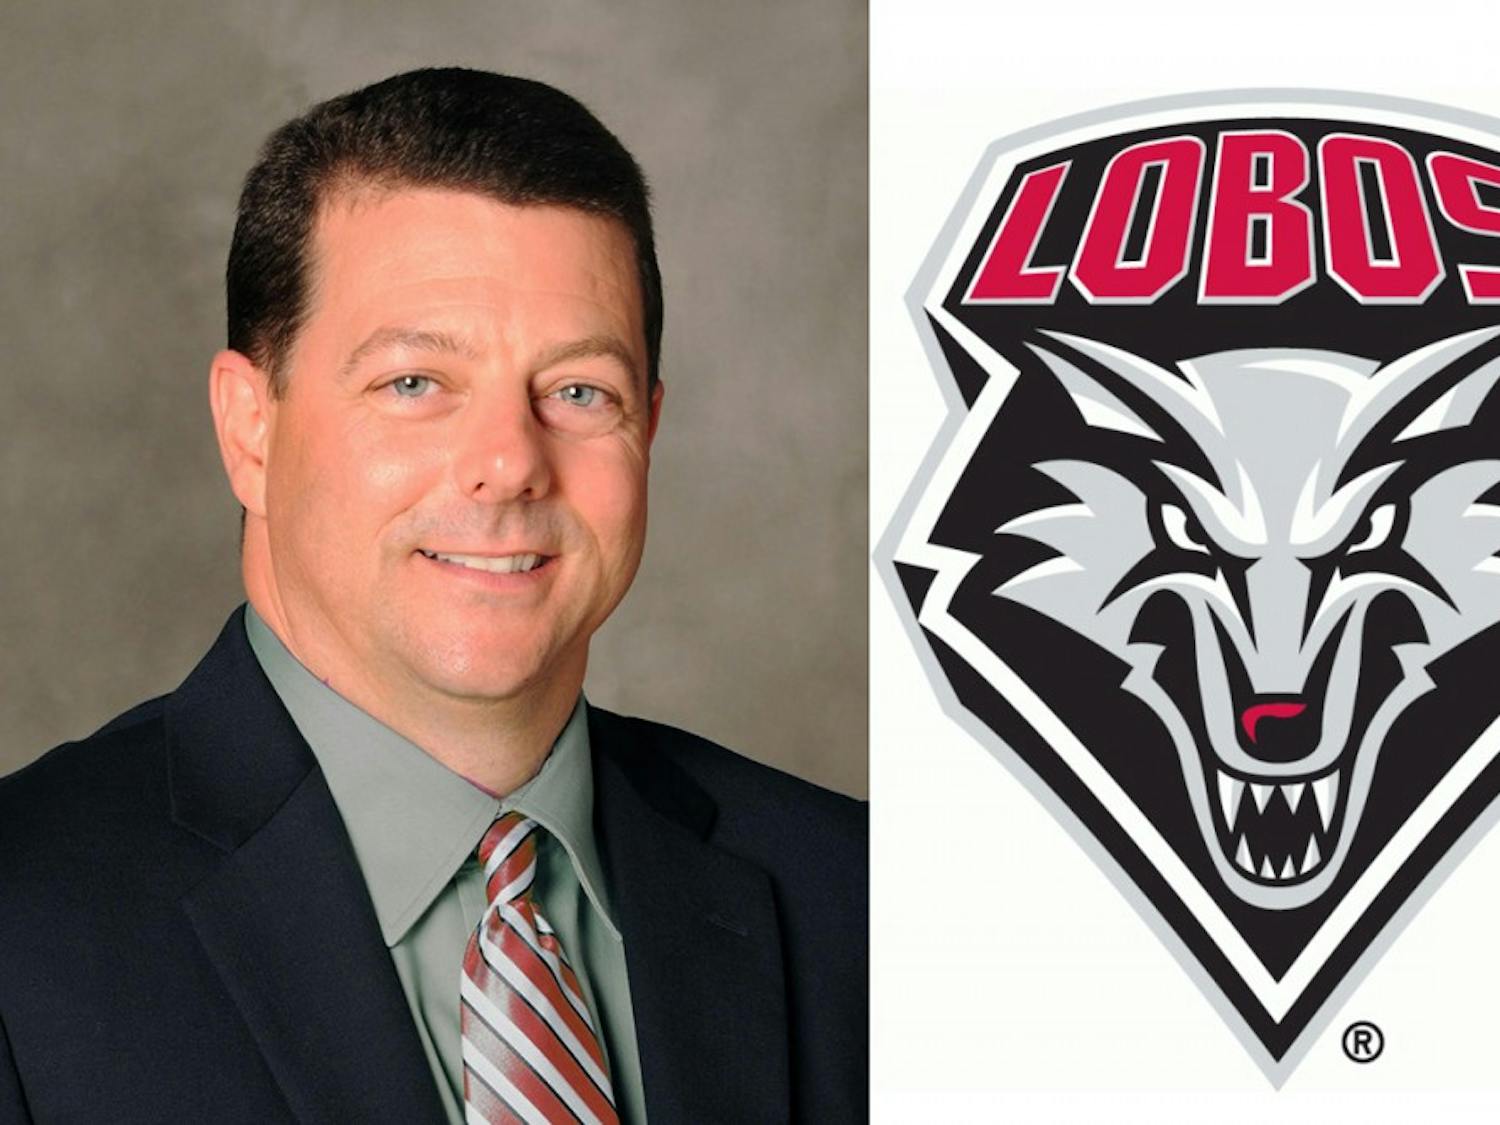 New Mexico will hire Wright State basketball coach Mike Bradbury to be the Lobos women's basketball head coach, the athletic department announced Wednesday afternoon.